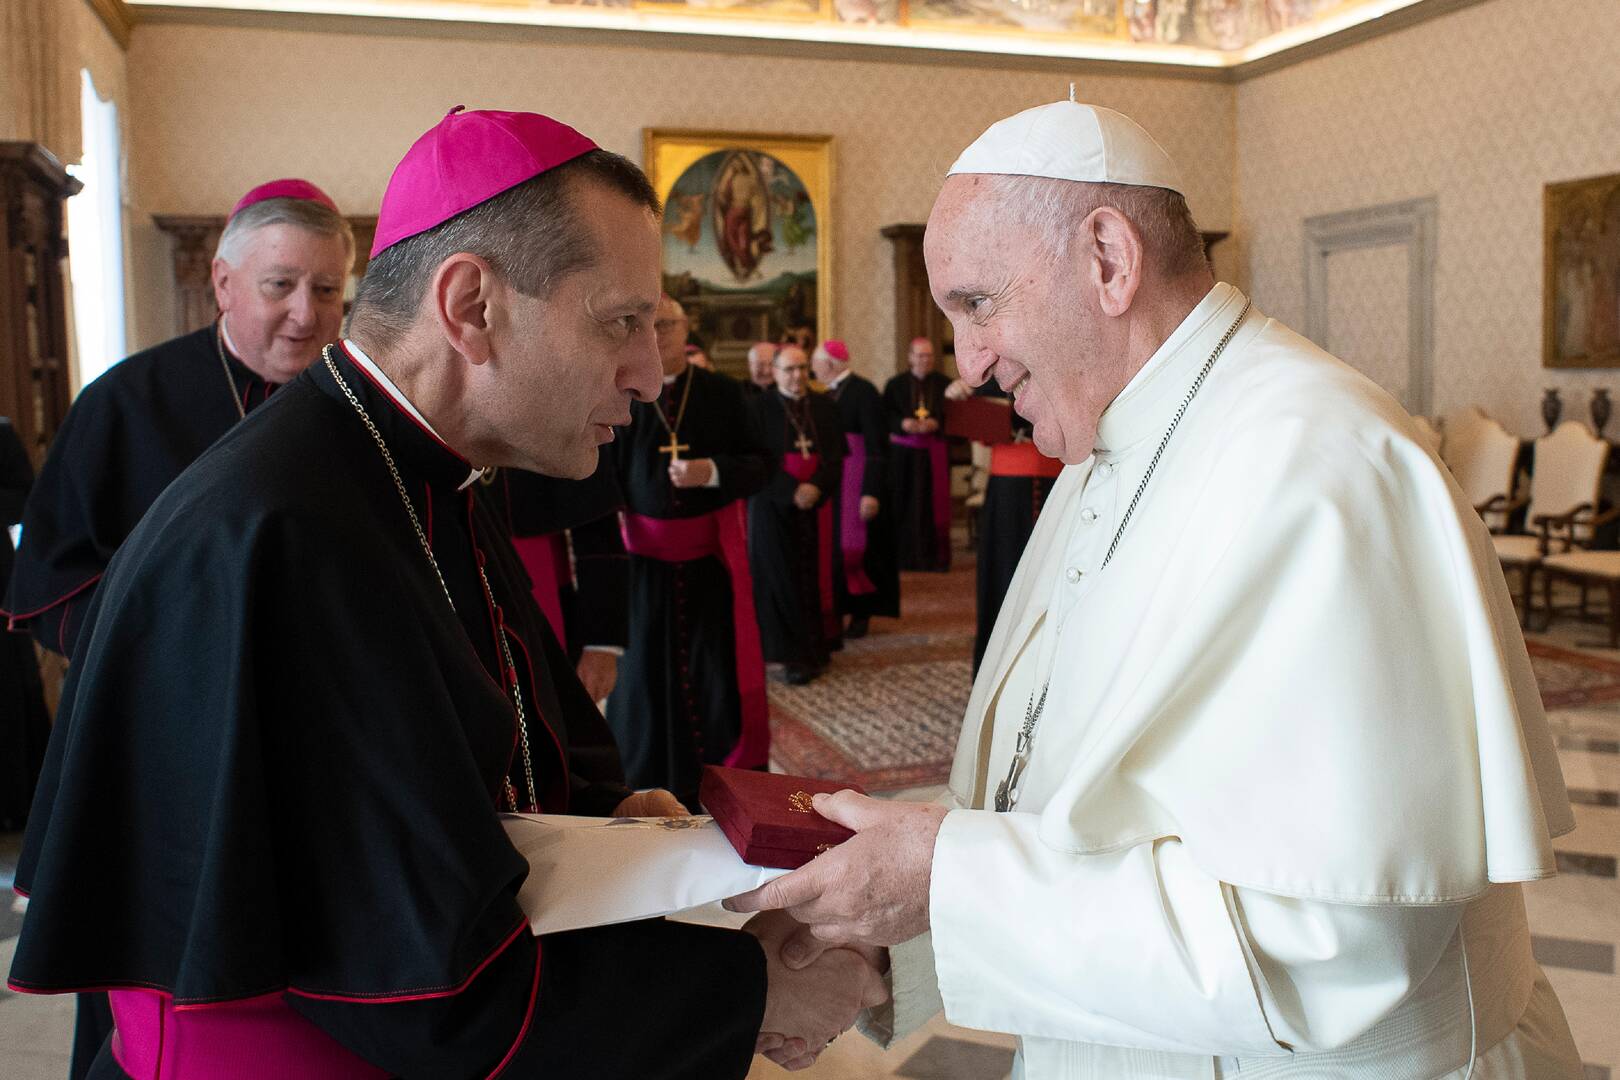 Pope Francis greets Bishop Frank J. Caggiano of Bridgeport, Conn., during a meeting with U.S. bishops from the New England States at the Vatican Nov. 7, 2019. The bishops were making their "ad limina" visits to the Vatican to report on the status of their dioceses to the pope and Vatican officials. (CNS photo/Vatican Media)